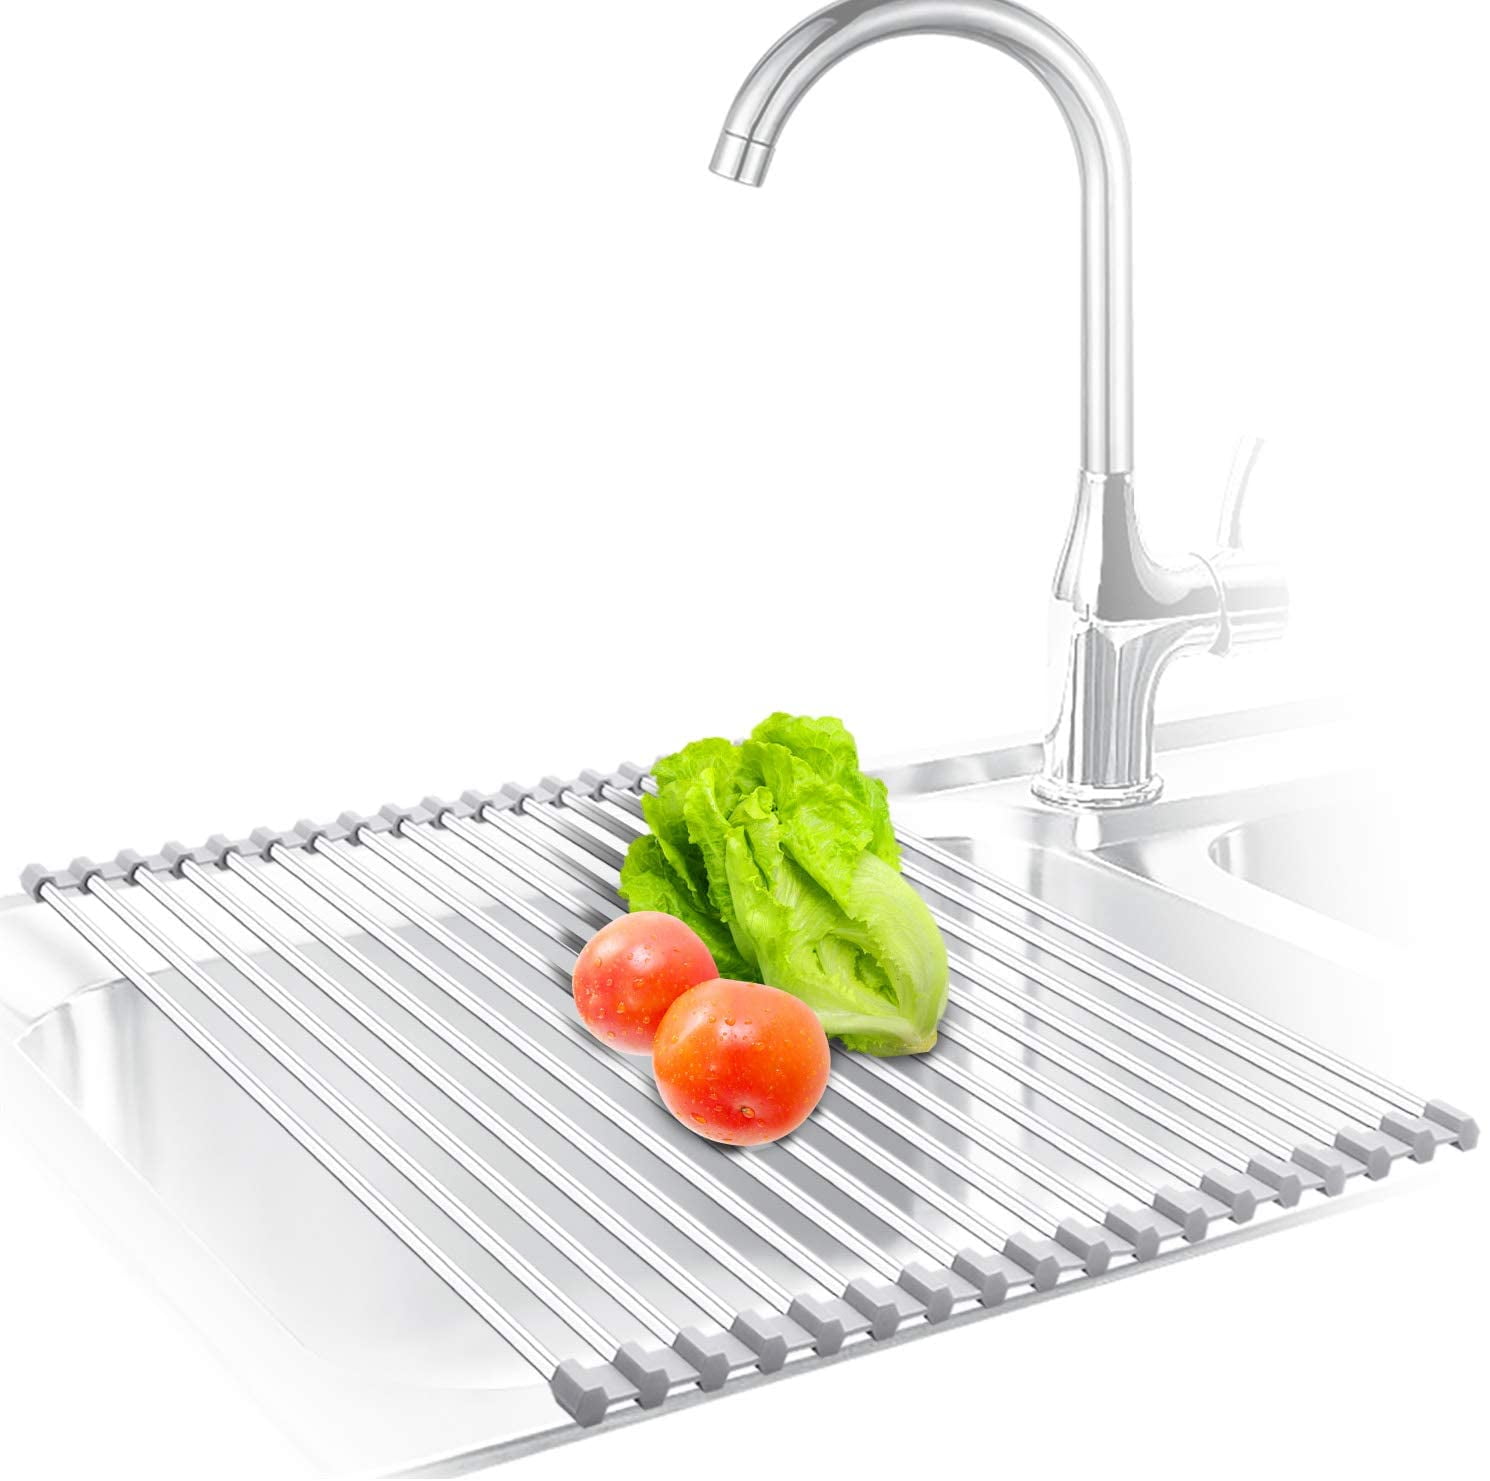 WEBI Over The Sink Dish Drying Rack,20.5'' Roll Up Over Sink Dish Rack,Folding  Dish Drainer,Wire Kitchen Utensil Draining Rack for Dishes,Kitchen,Pot,Pan,Grey